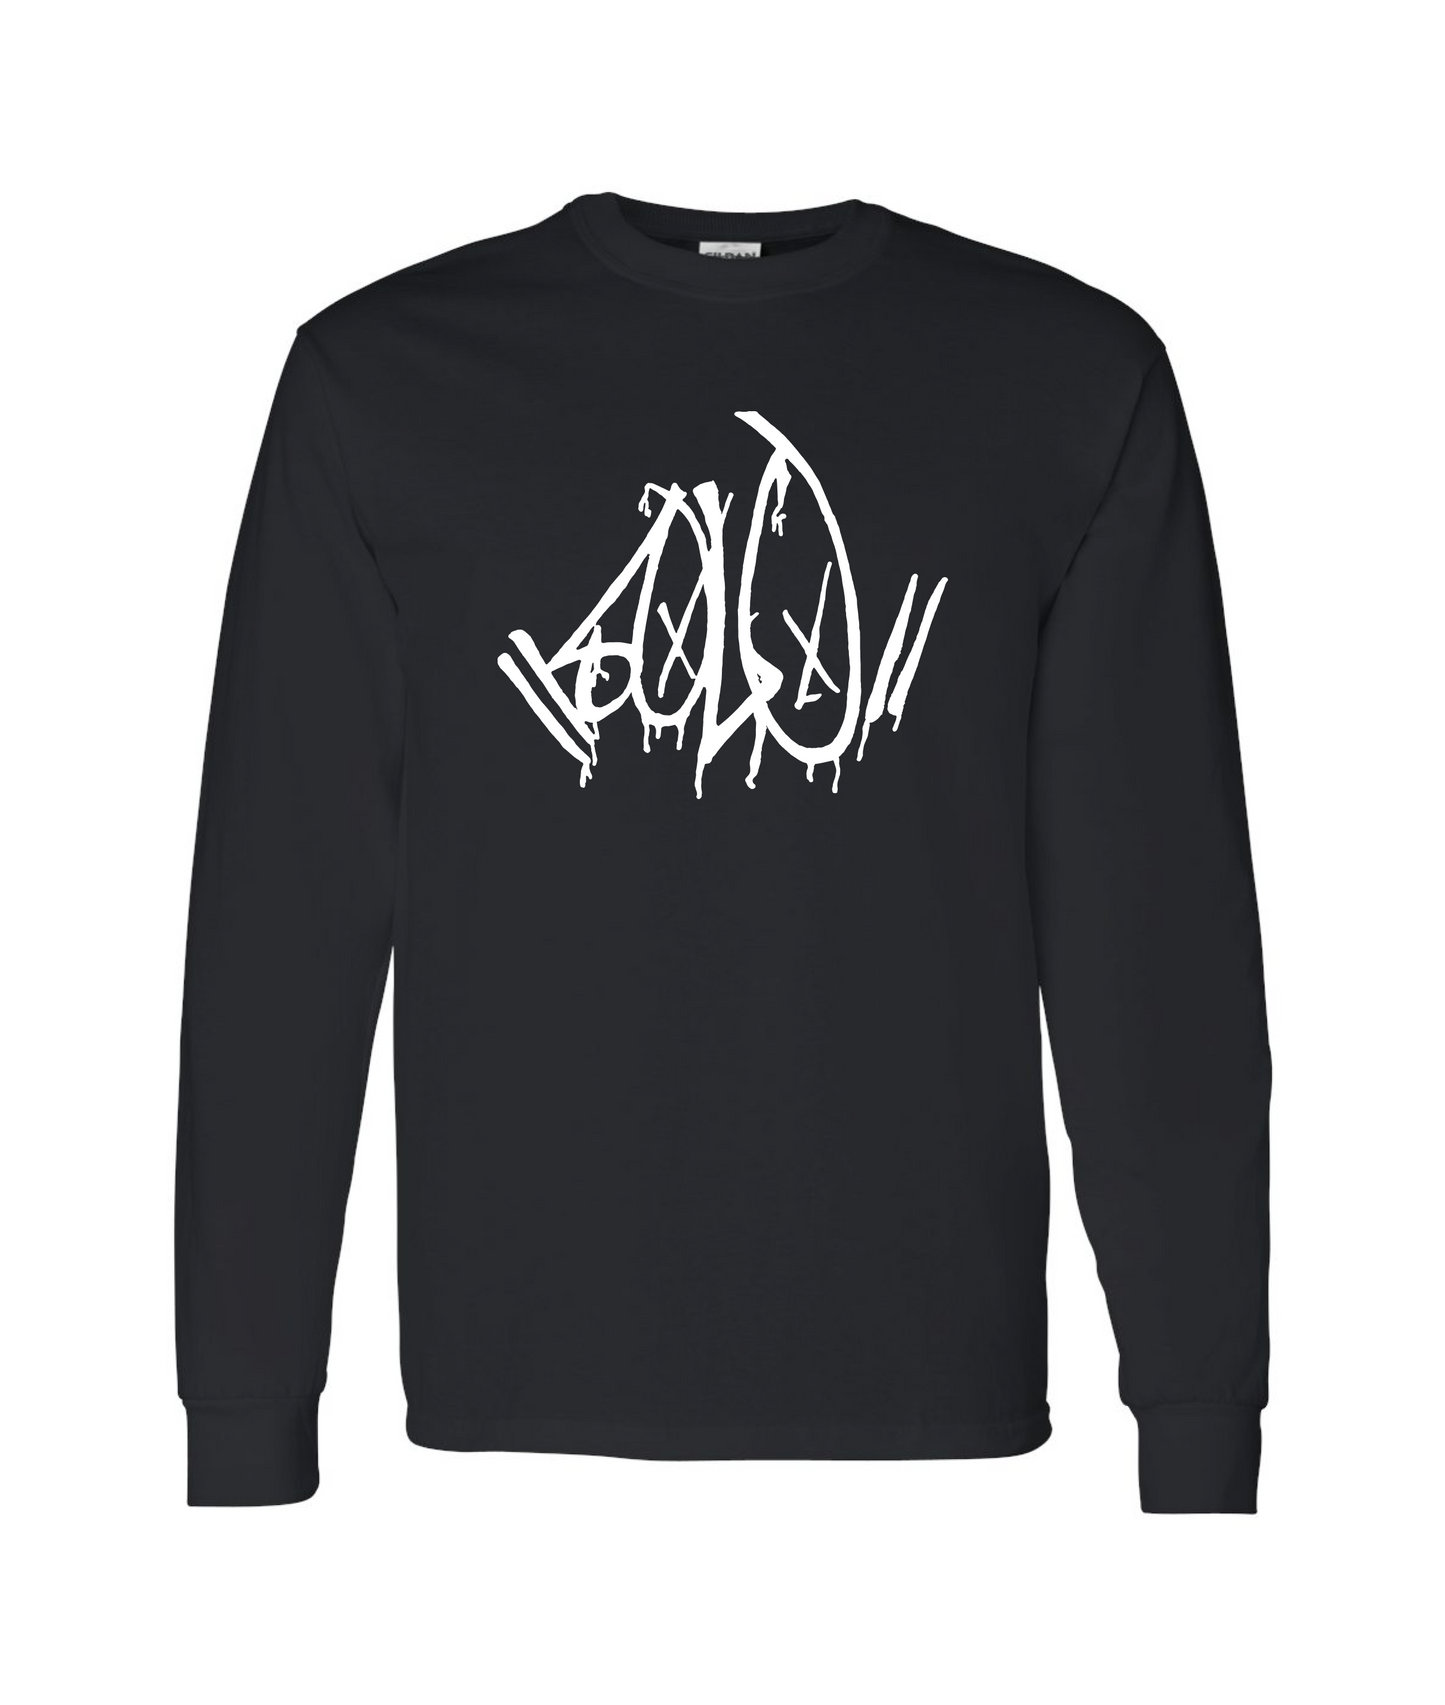 Solo Tag Long Sleeve T